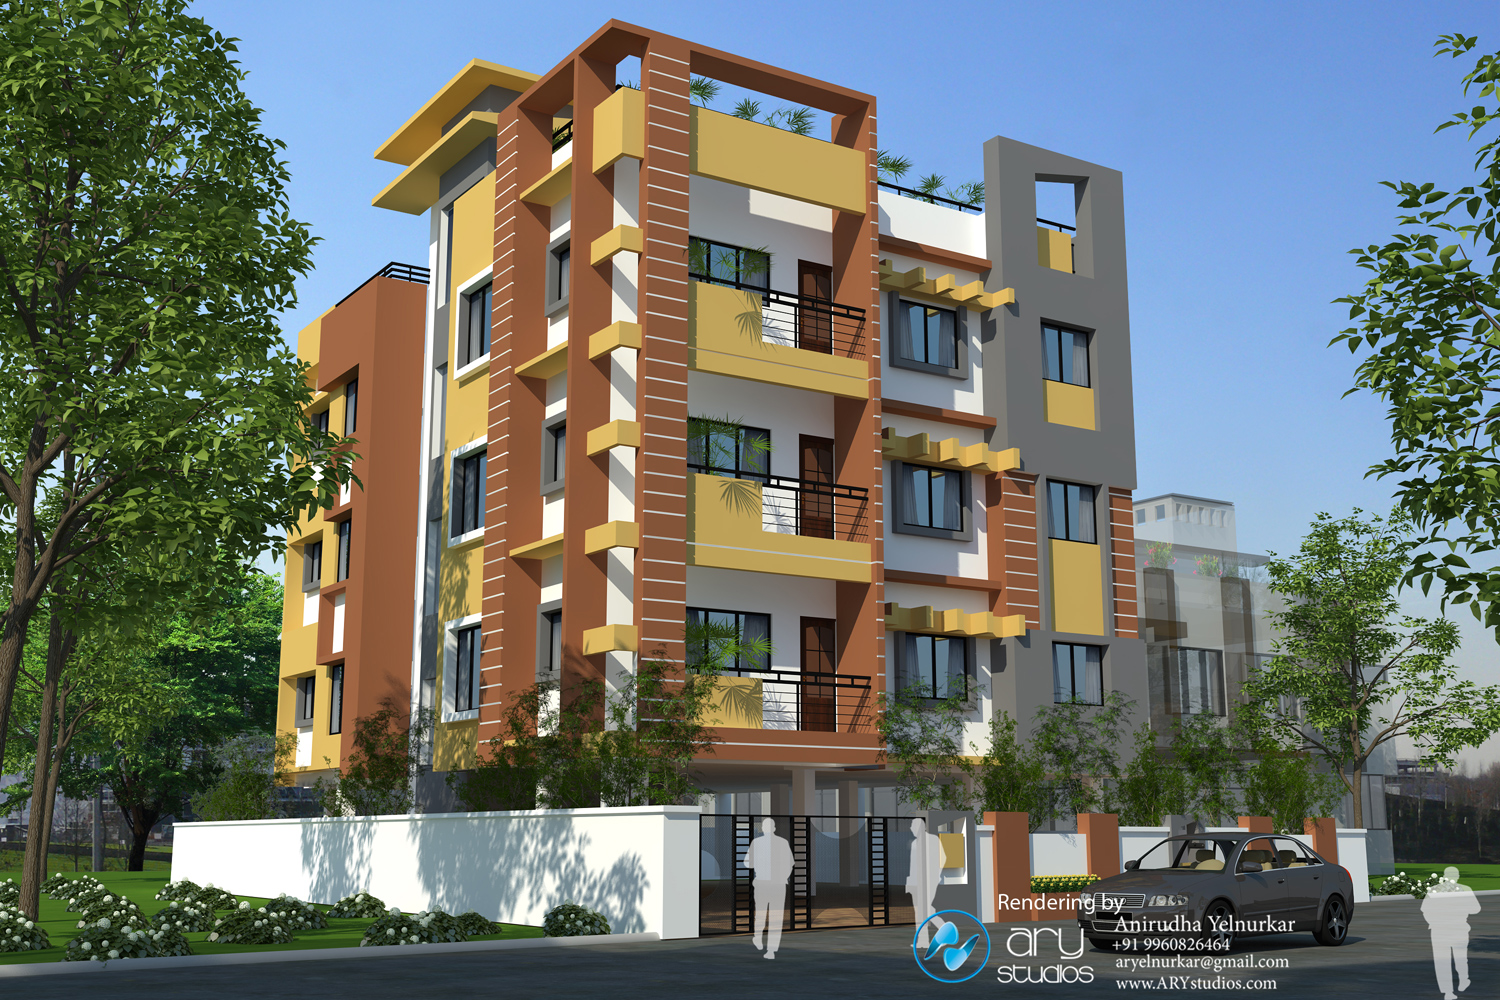 House Design India on Exterior Architectural Rendering Building Design 3d Elevations